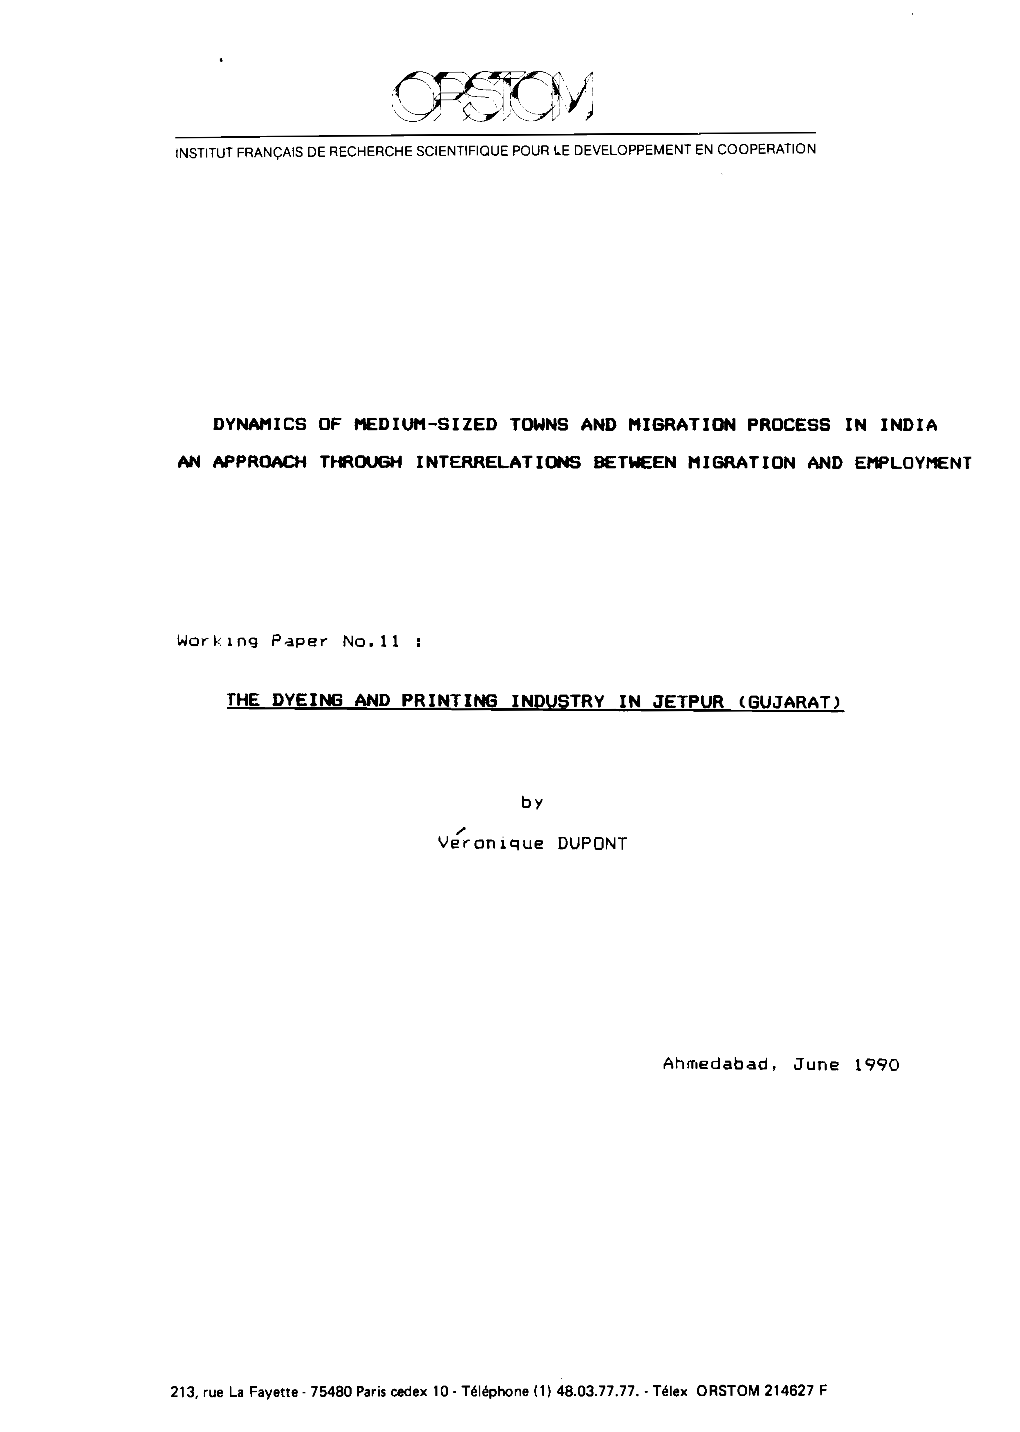 Working Paper 11. the Dyeing and Printing Industry in Jetpur (Gujarat)